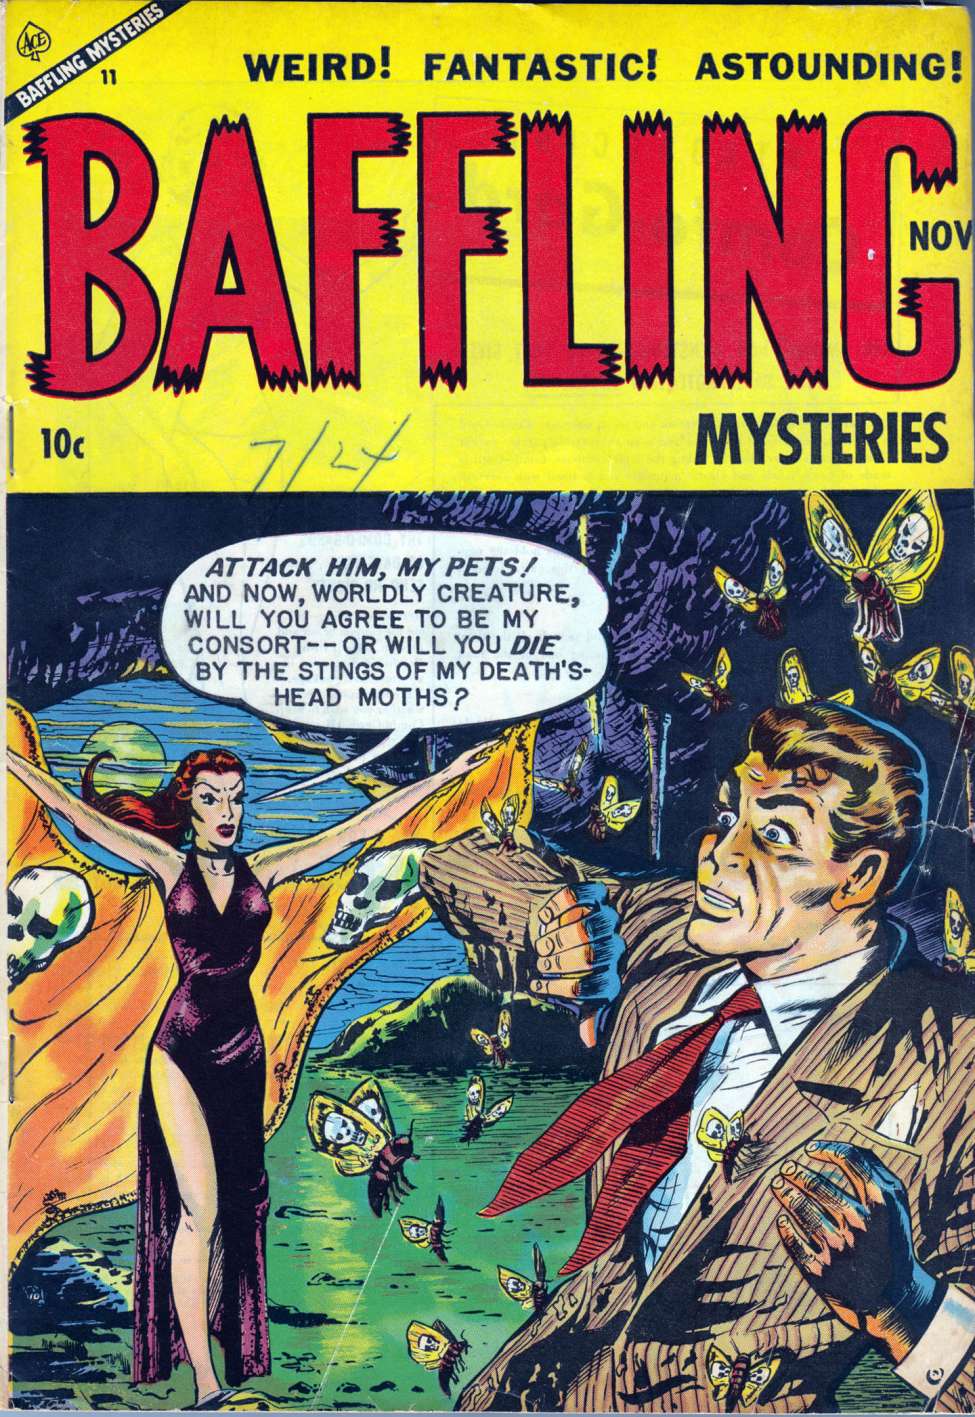 Book Cover For Baffling Mysteries 18 - Version 2